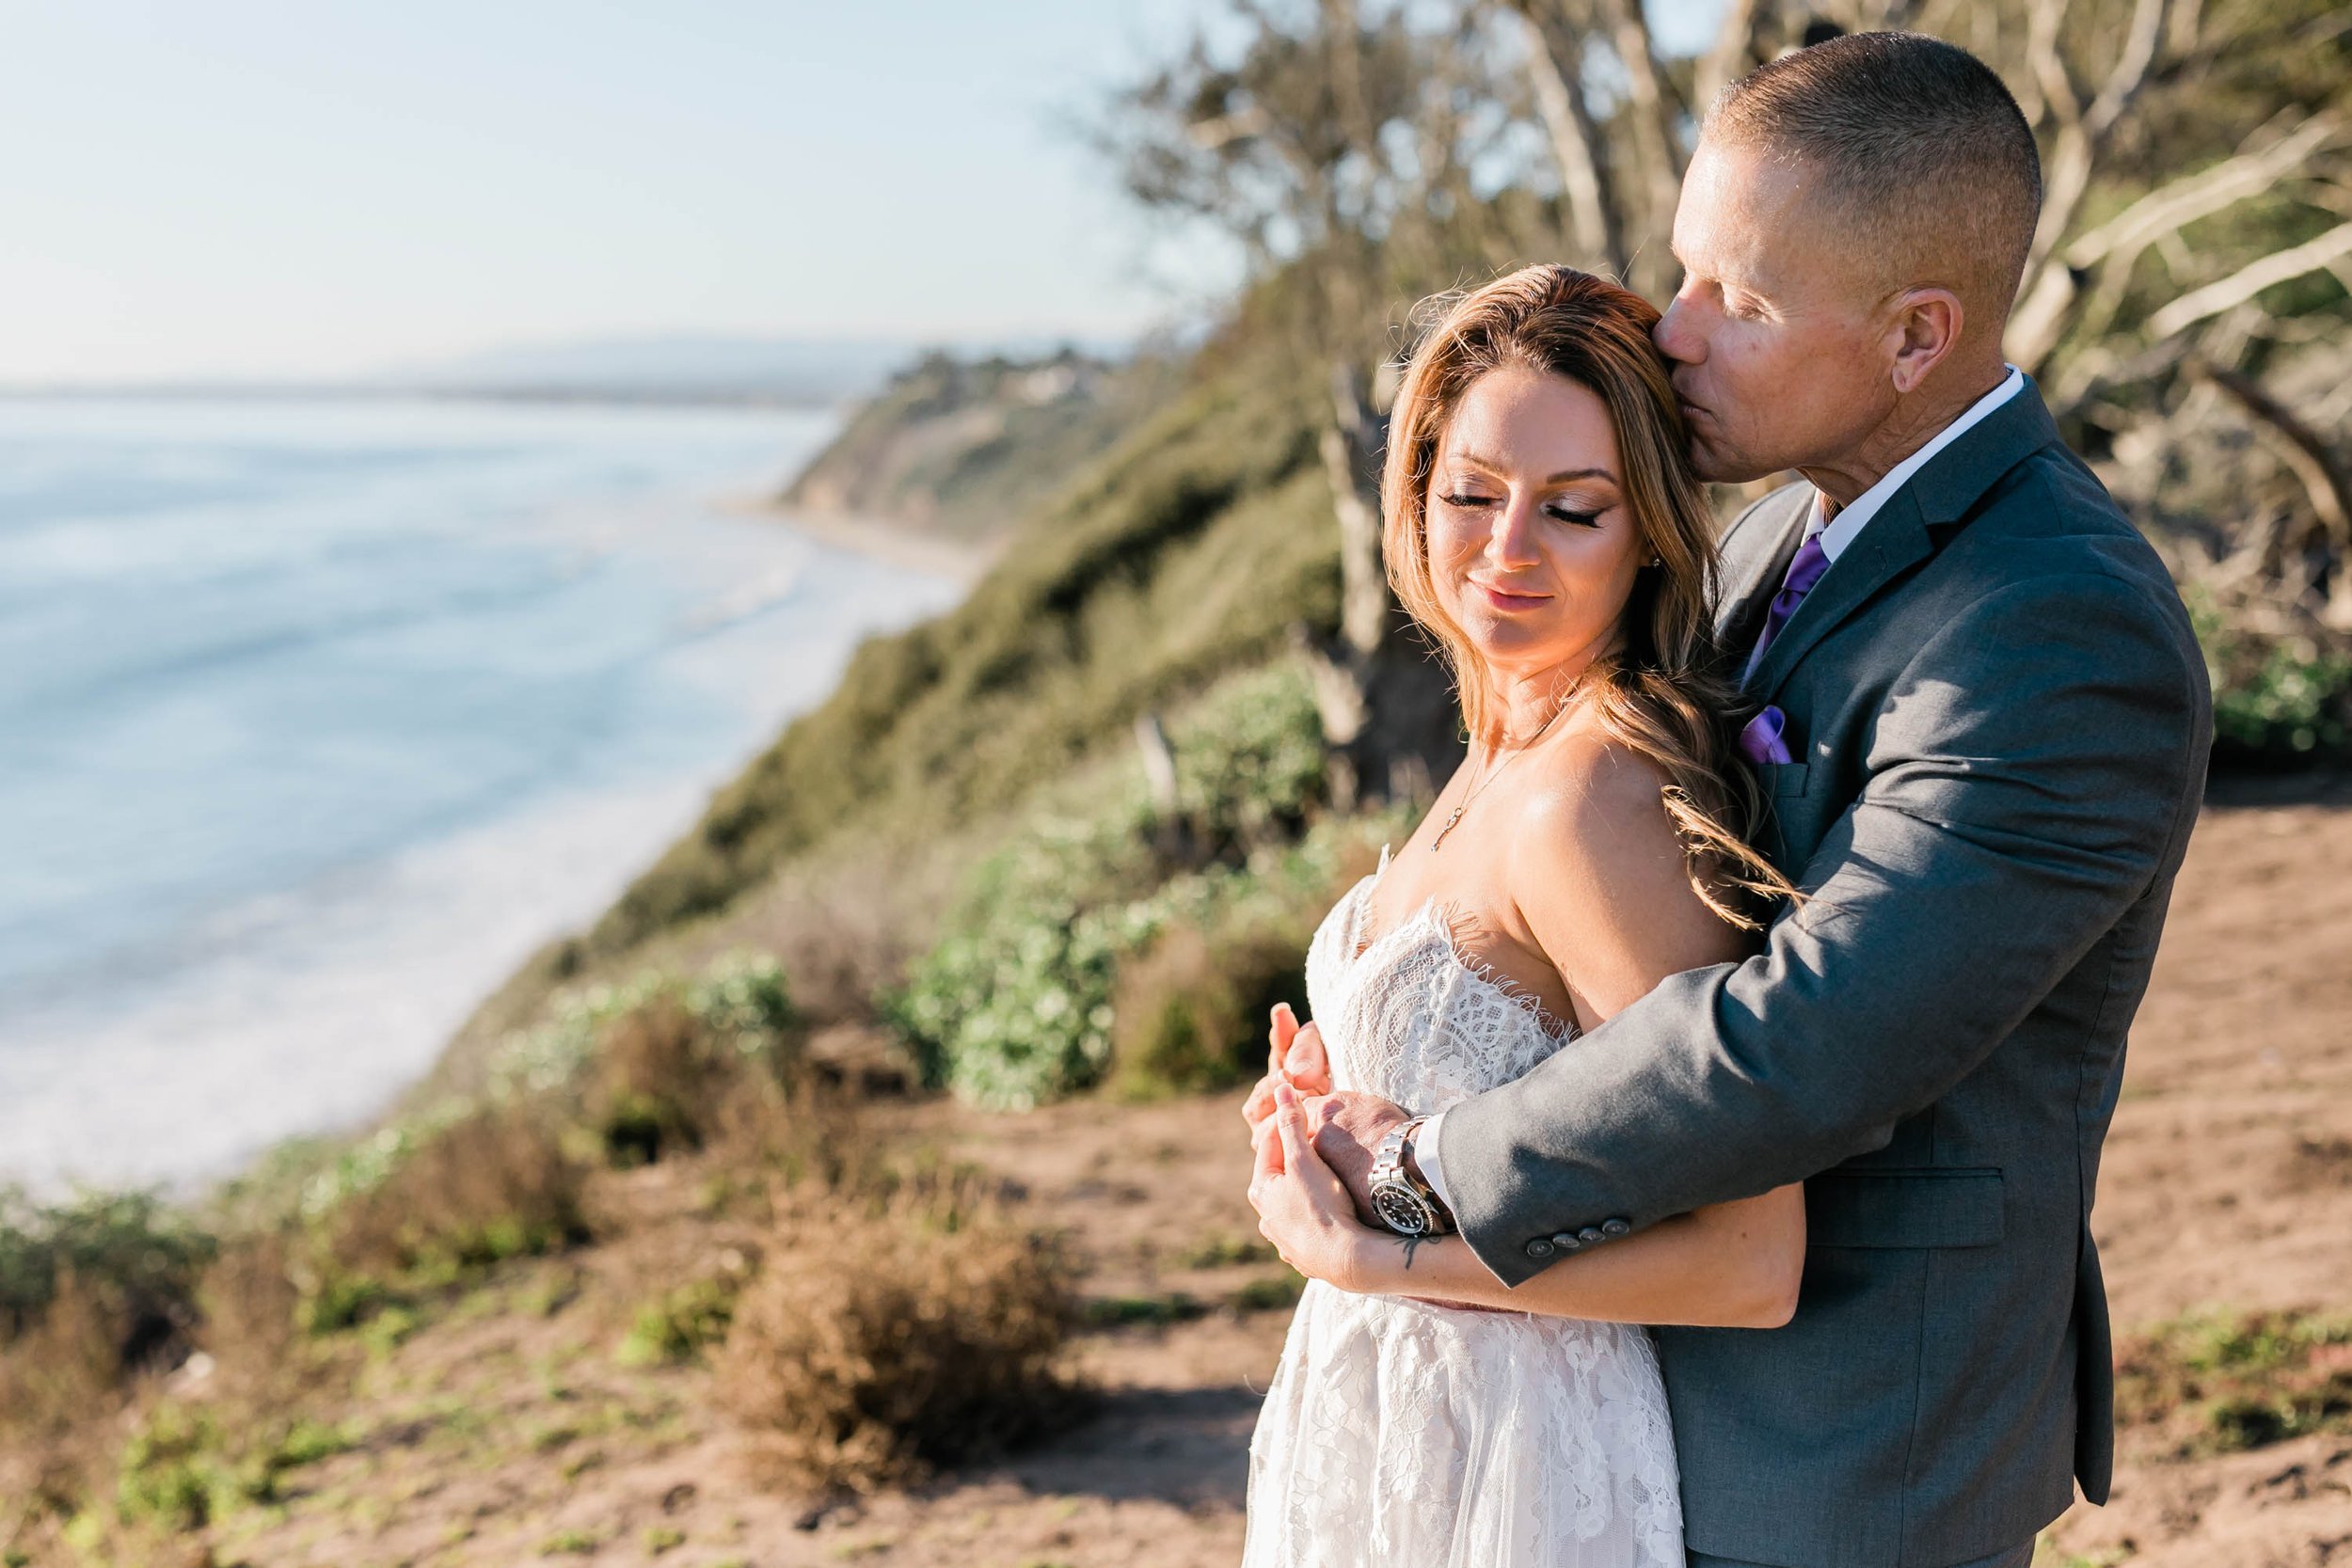  Santa Barbara Courthouse Elopement Wedding bride and groom photo session 